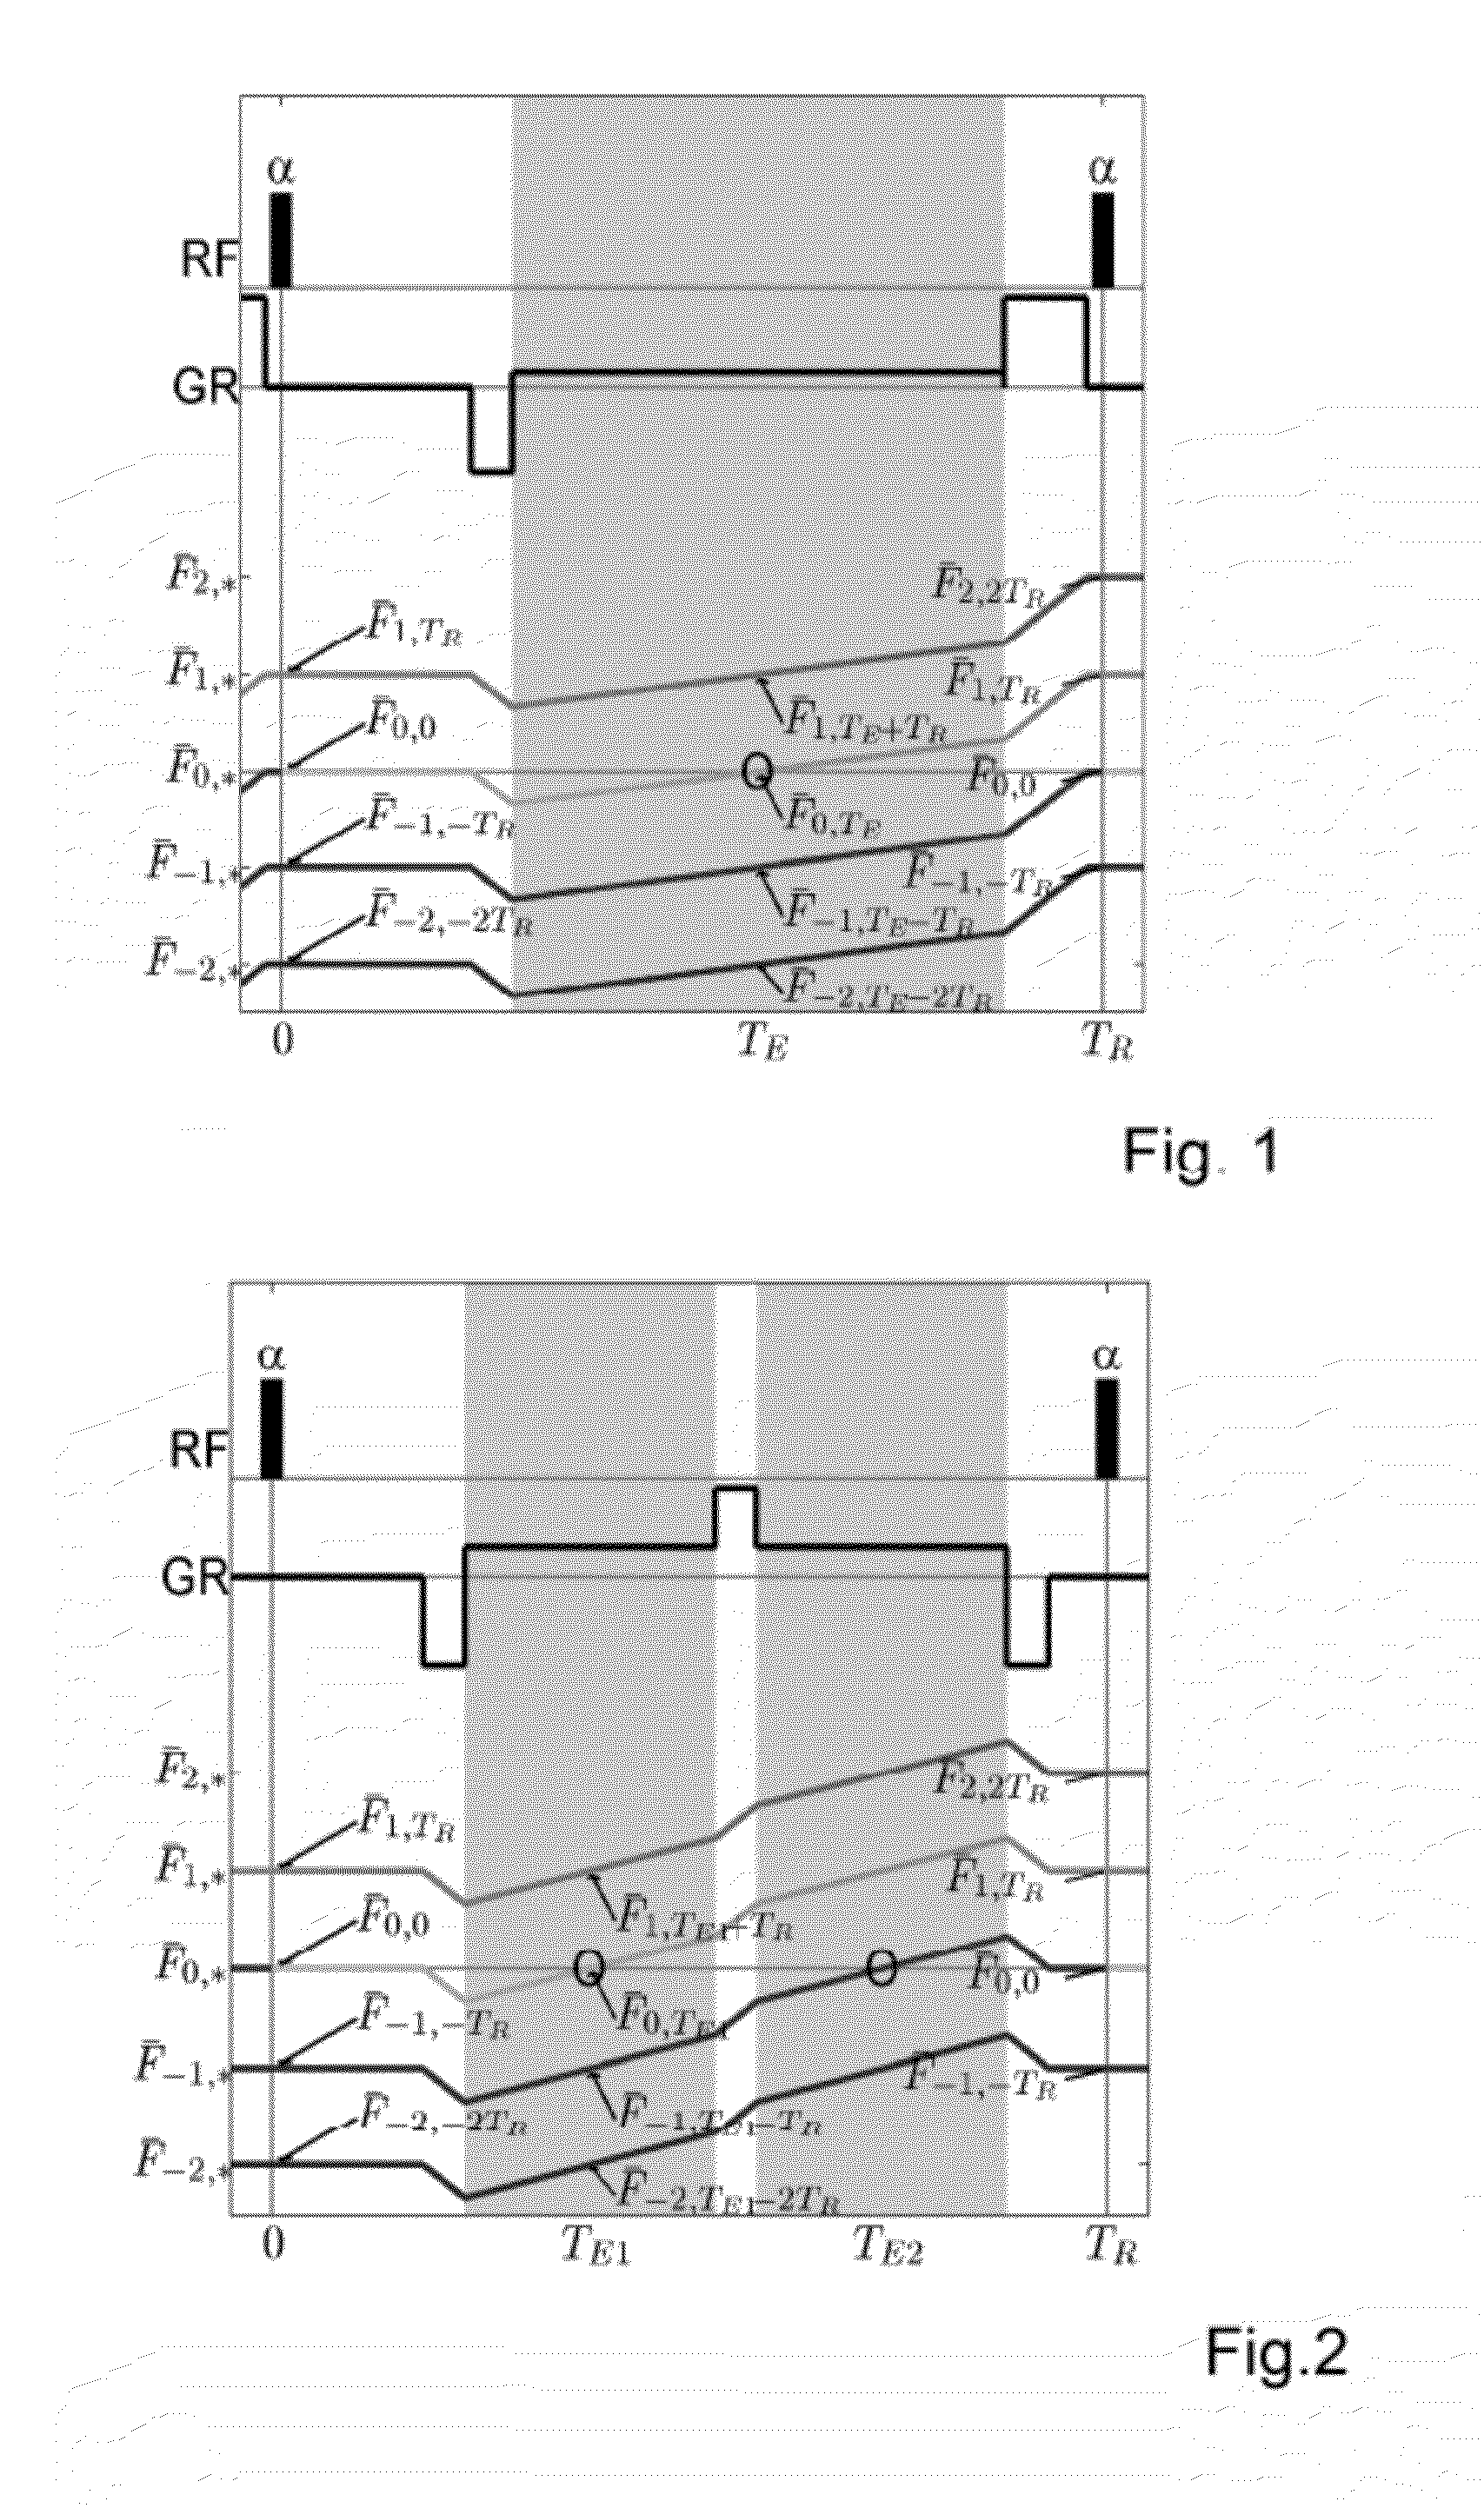 Method of generating 2D or 3D maps of MRI T1 and T2 relaxation times